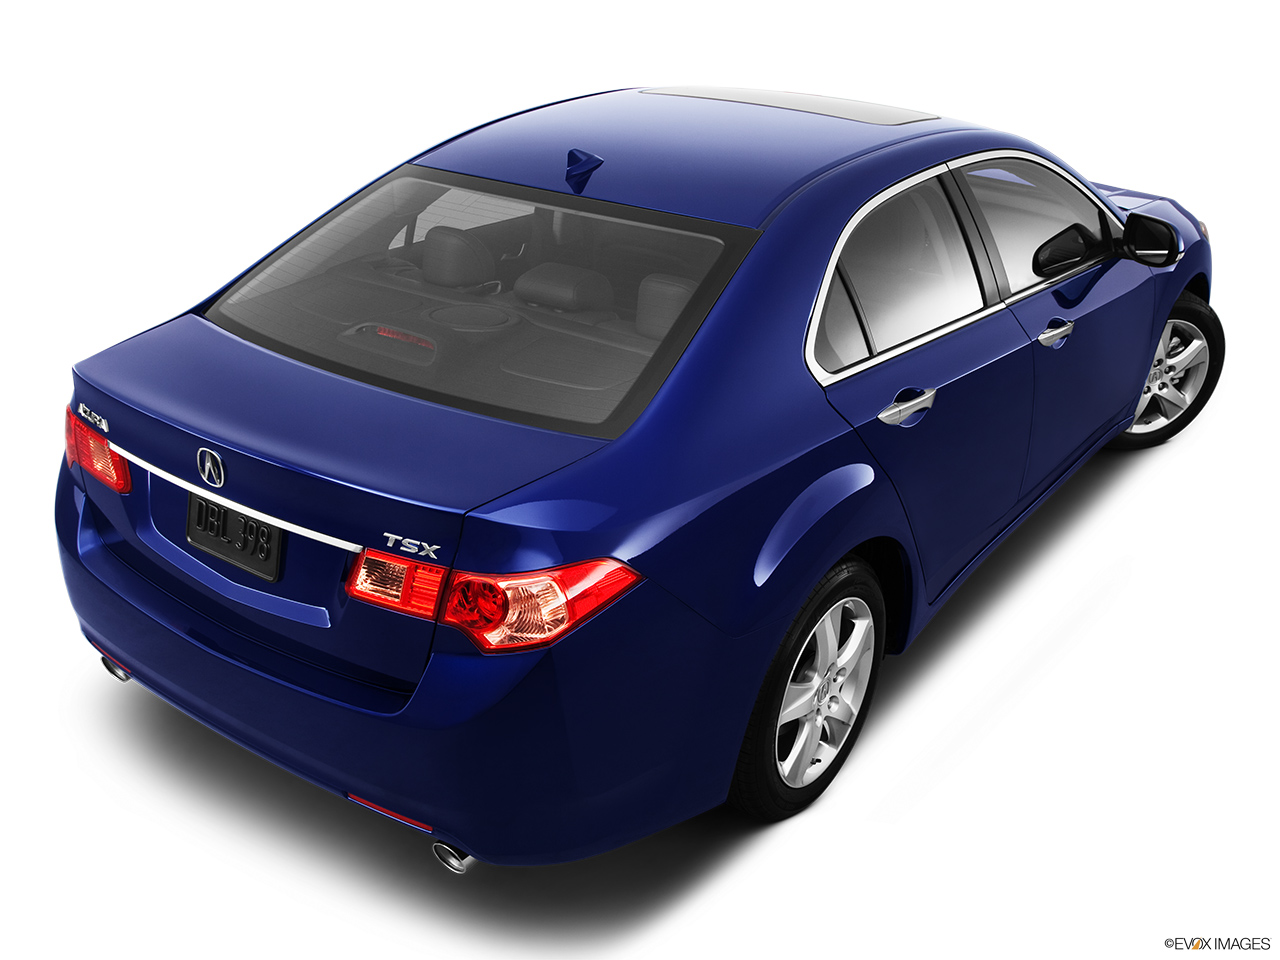 2012 Acura TSX TSX 5-speed Automatic Rear 3/4 angle view. 